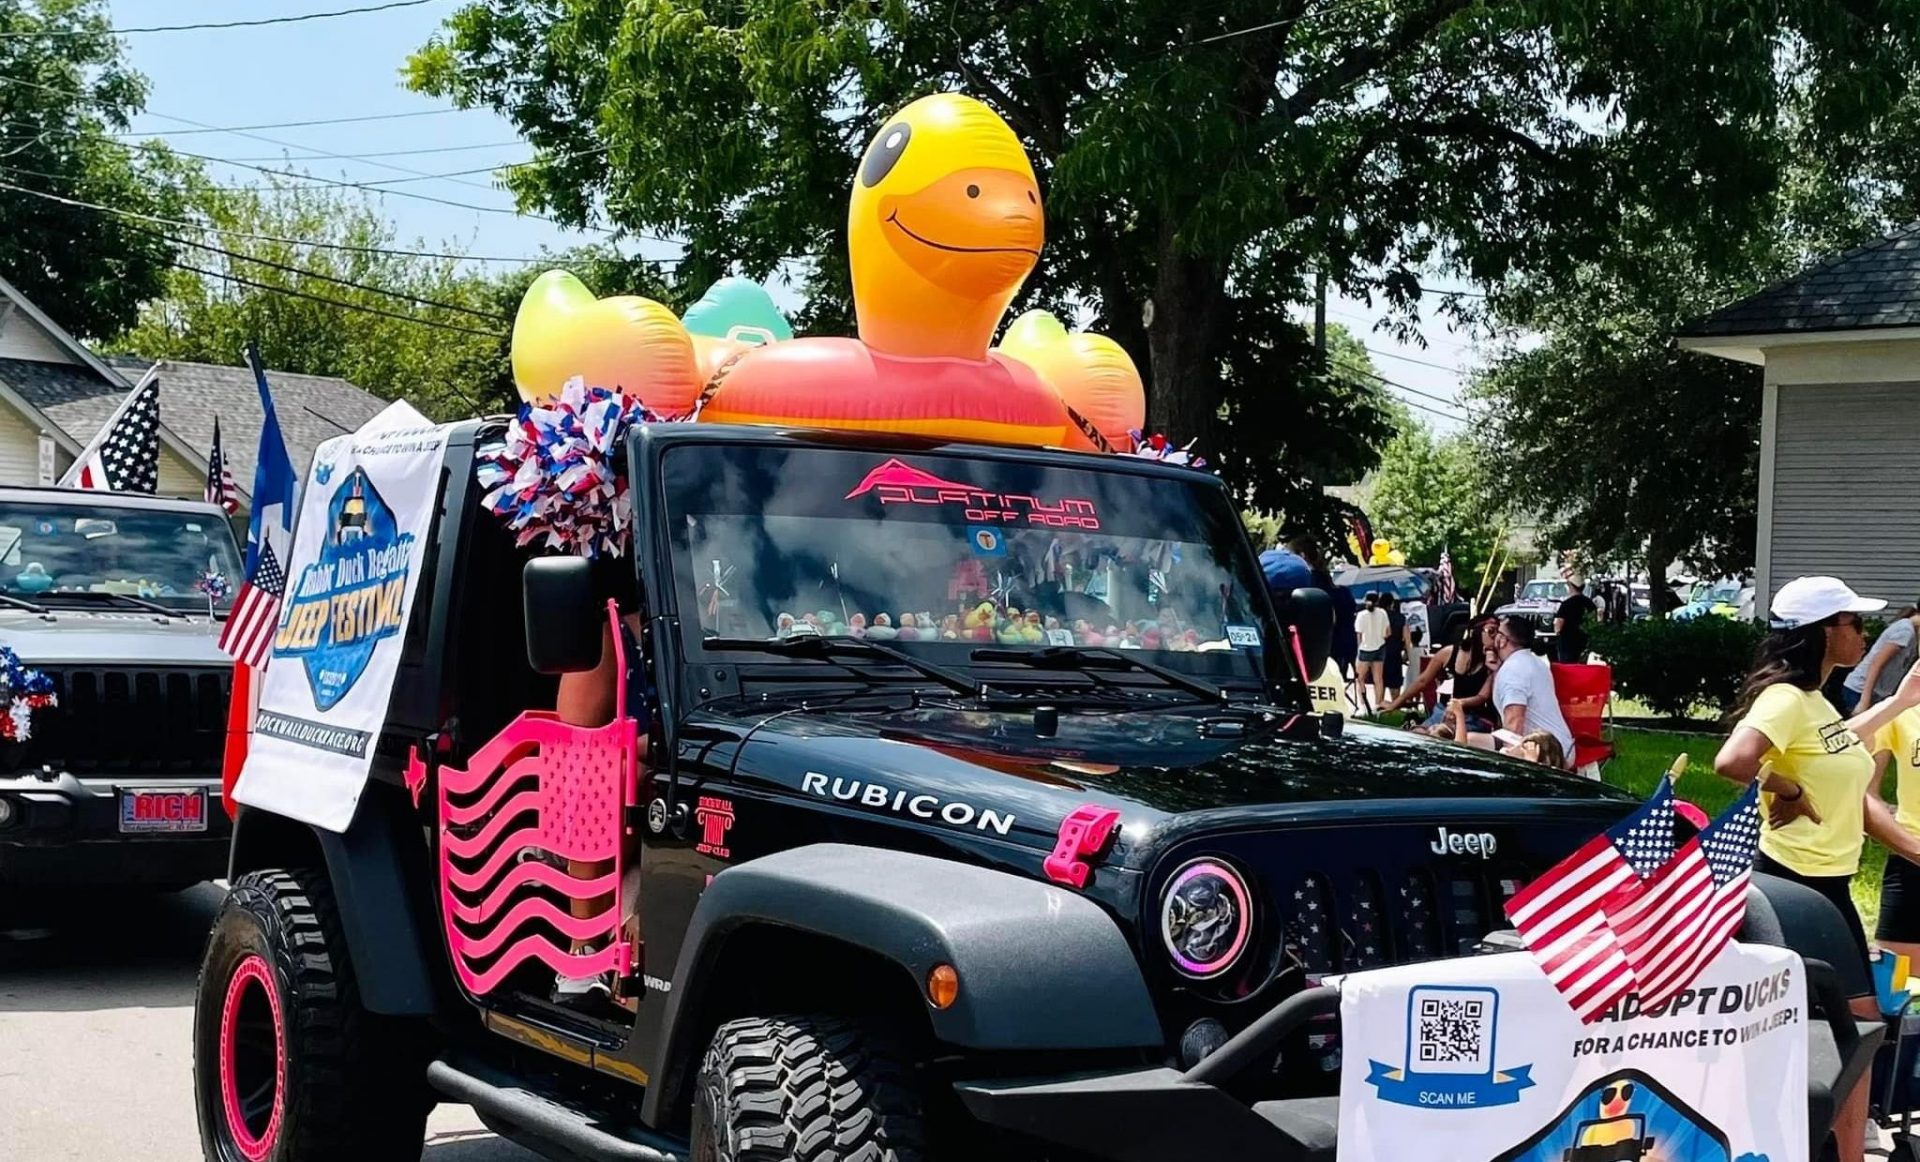 https://blueribbonnews.com/wp-content/uploads/2023/08/PARADE_Jeep-with-inflatable-on-top-e1691437035653.jpg